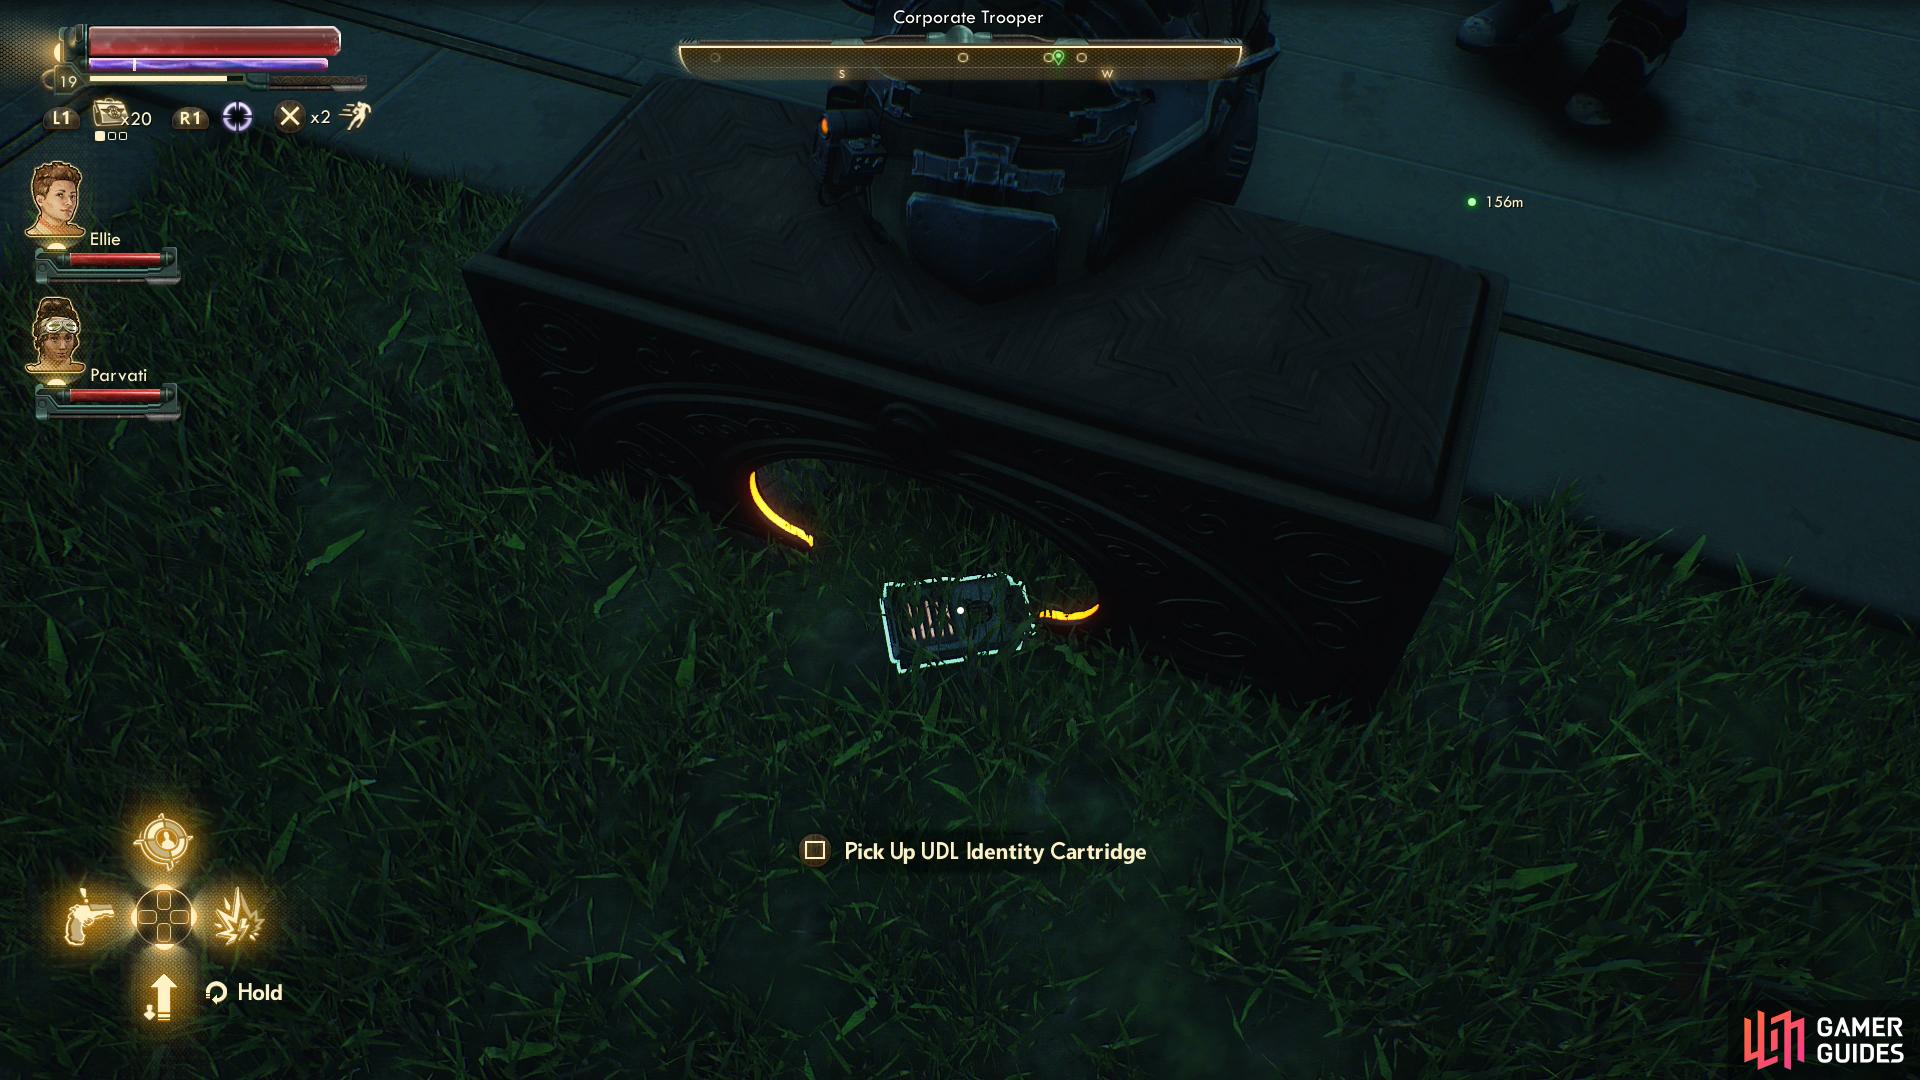 You can find a UDL ID Cartridge under a bench near the canal,